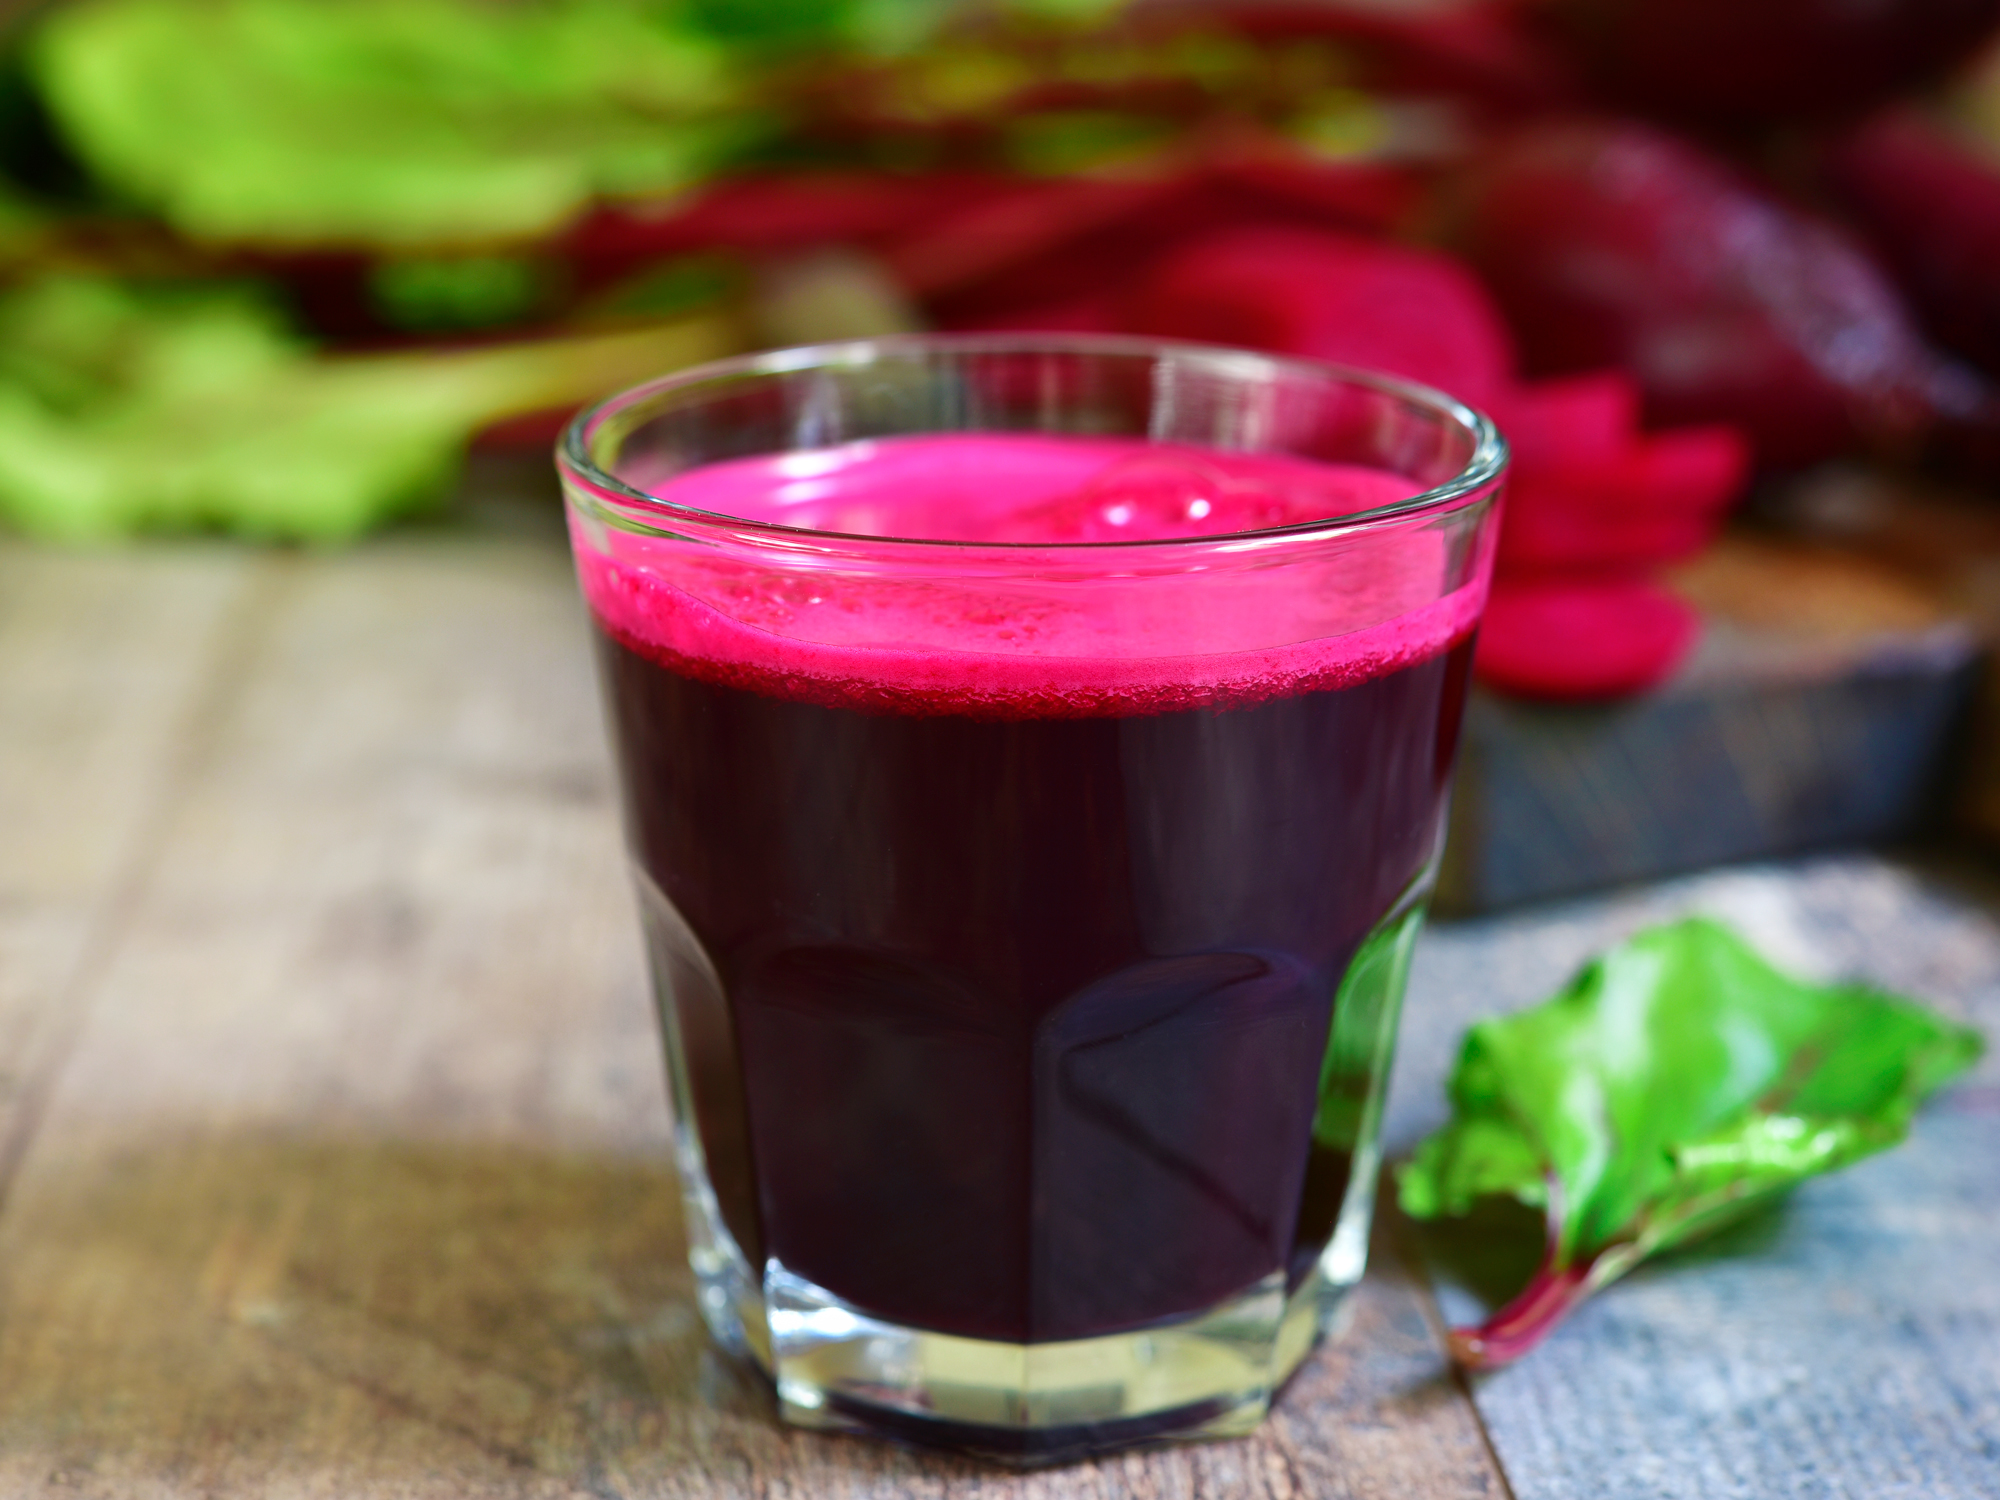 The root juice that boosts the weakest hearts